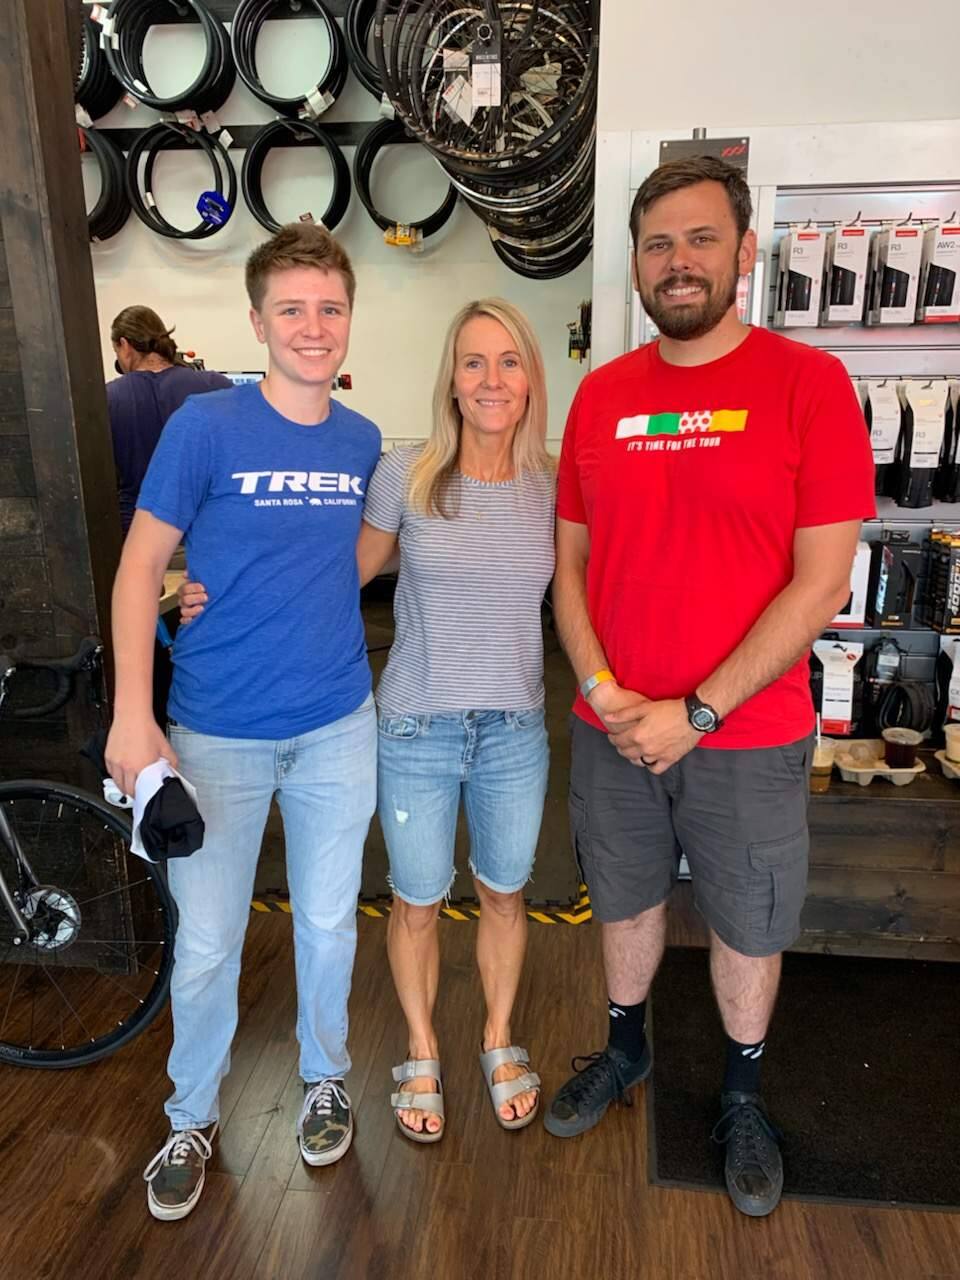 Marisa Denison, center, poses Saturday between Brianna Peebles, left, and Matt Roark of the Trek Bicycle store in Santa Rosa. Denison earlier finished the Ironman 70.3 Santa Rosa with the help of a bike gifted to her by the Trek store after a thief stole the bicycle she intended to ride. (Courtesy of Marisa Denison)